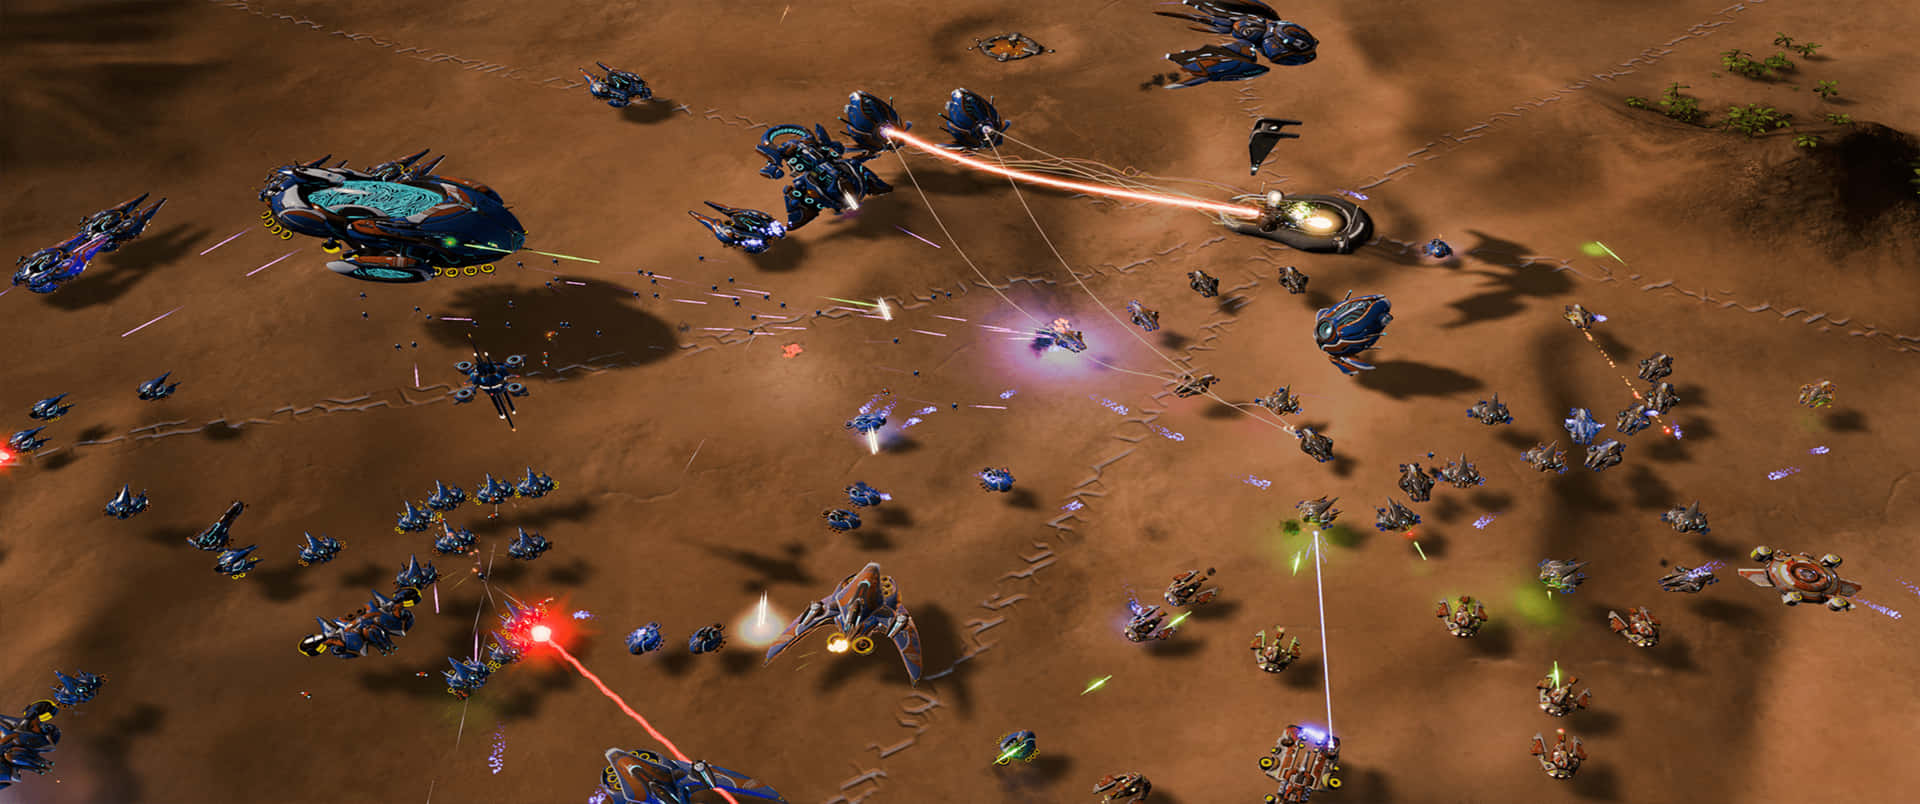 Play Ashes Of The Singularity Escalation in Ultra Wide Resolution